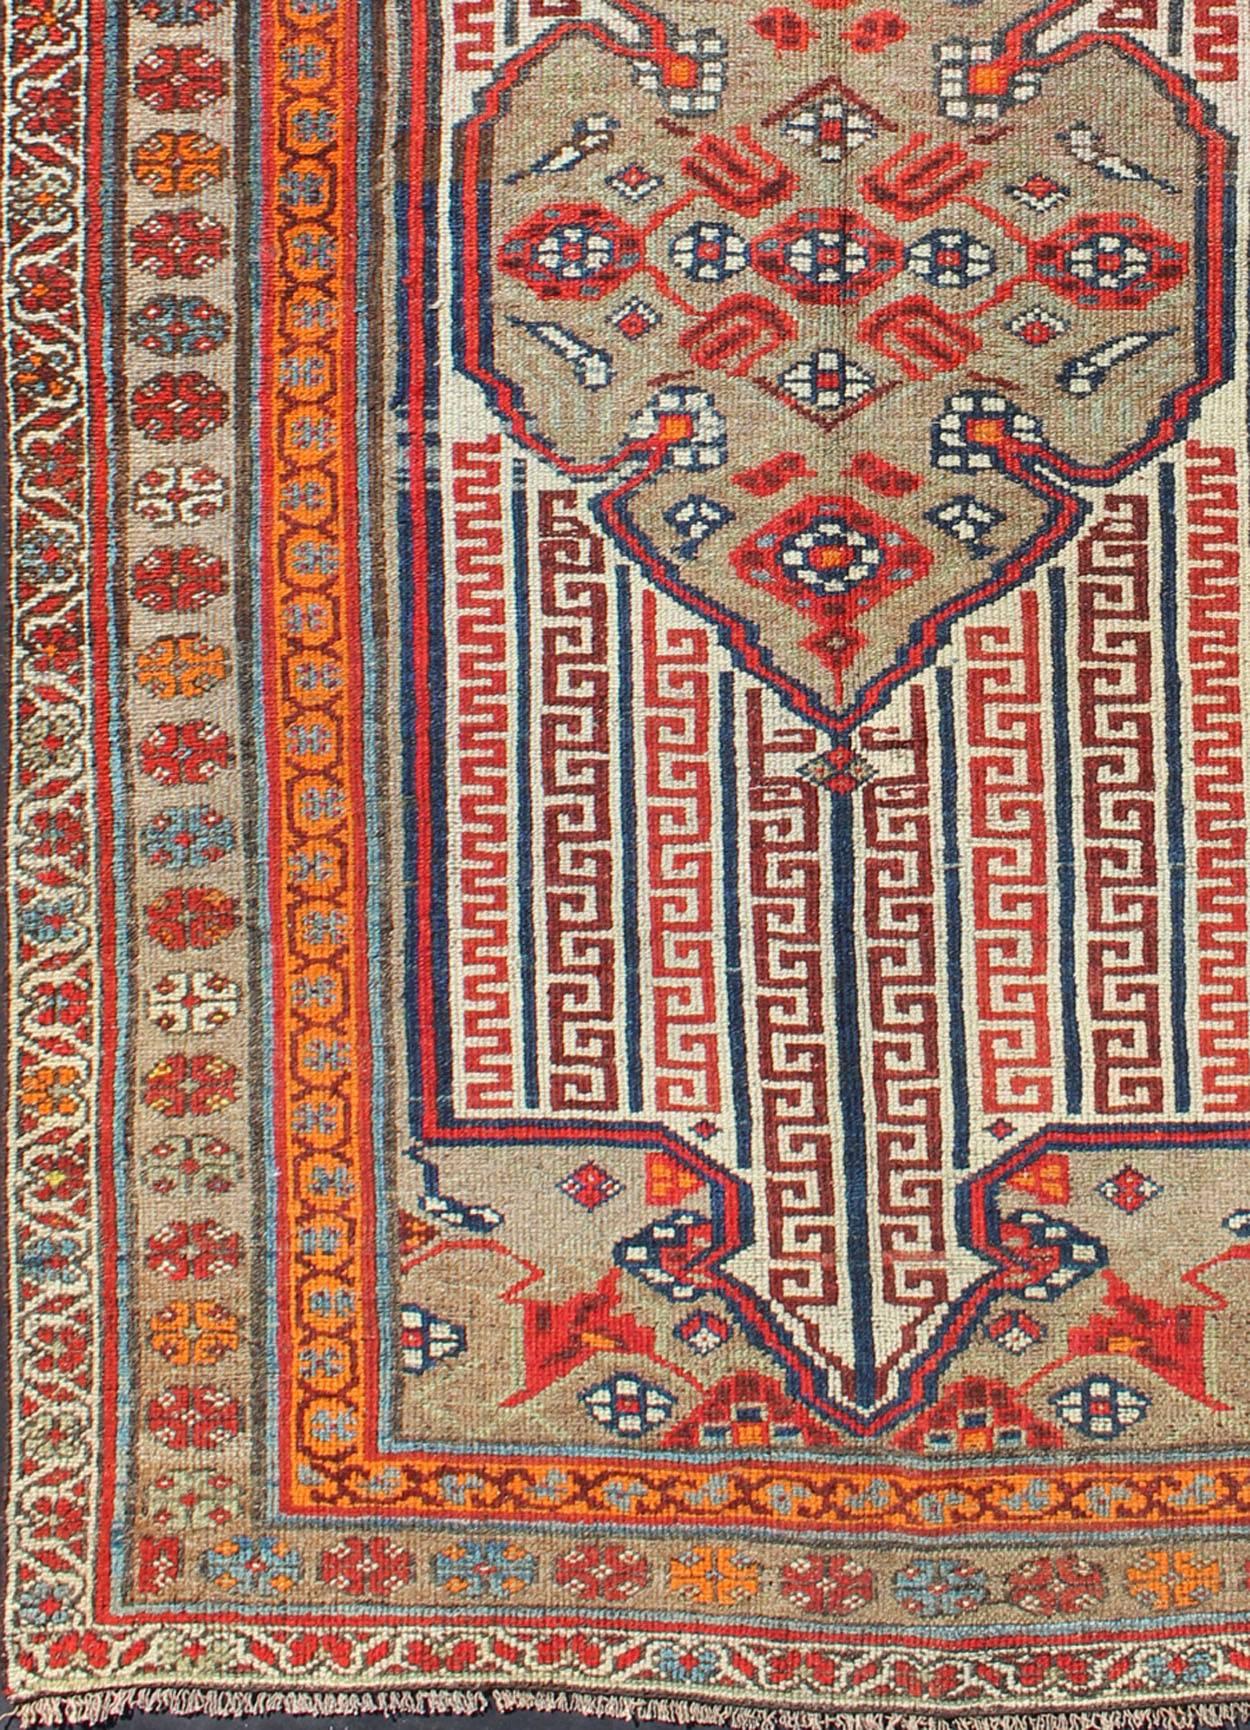 Antique Persian Seneh-Malayer Rug with Intricate Designs and Rich Color Palette.
Fine Seneh-Malayer rugs are known for their complexity of design and opulent color palettes. This particular piece features an intricate combination of motifs and